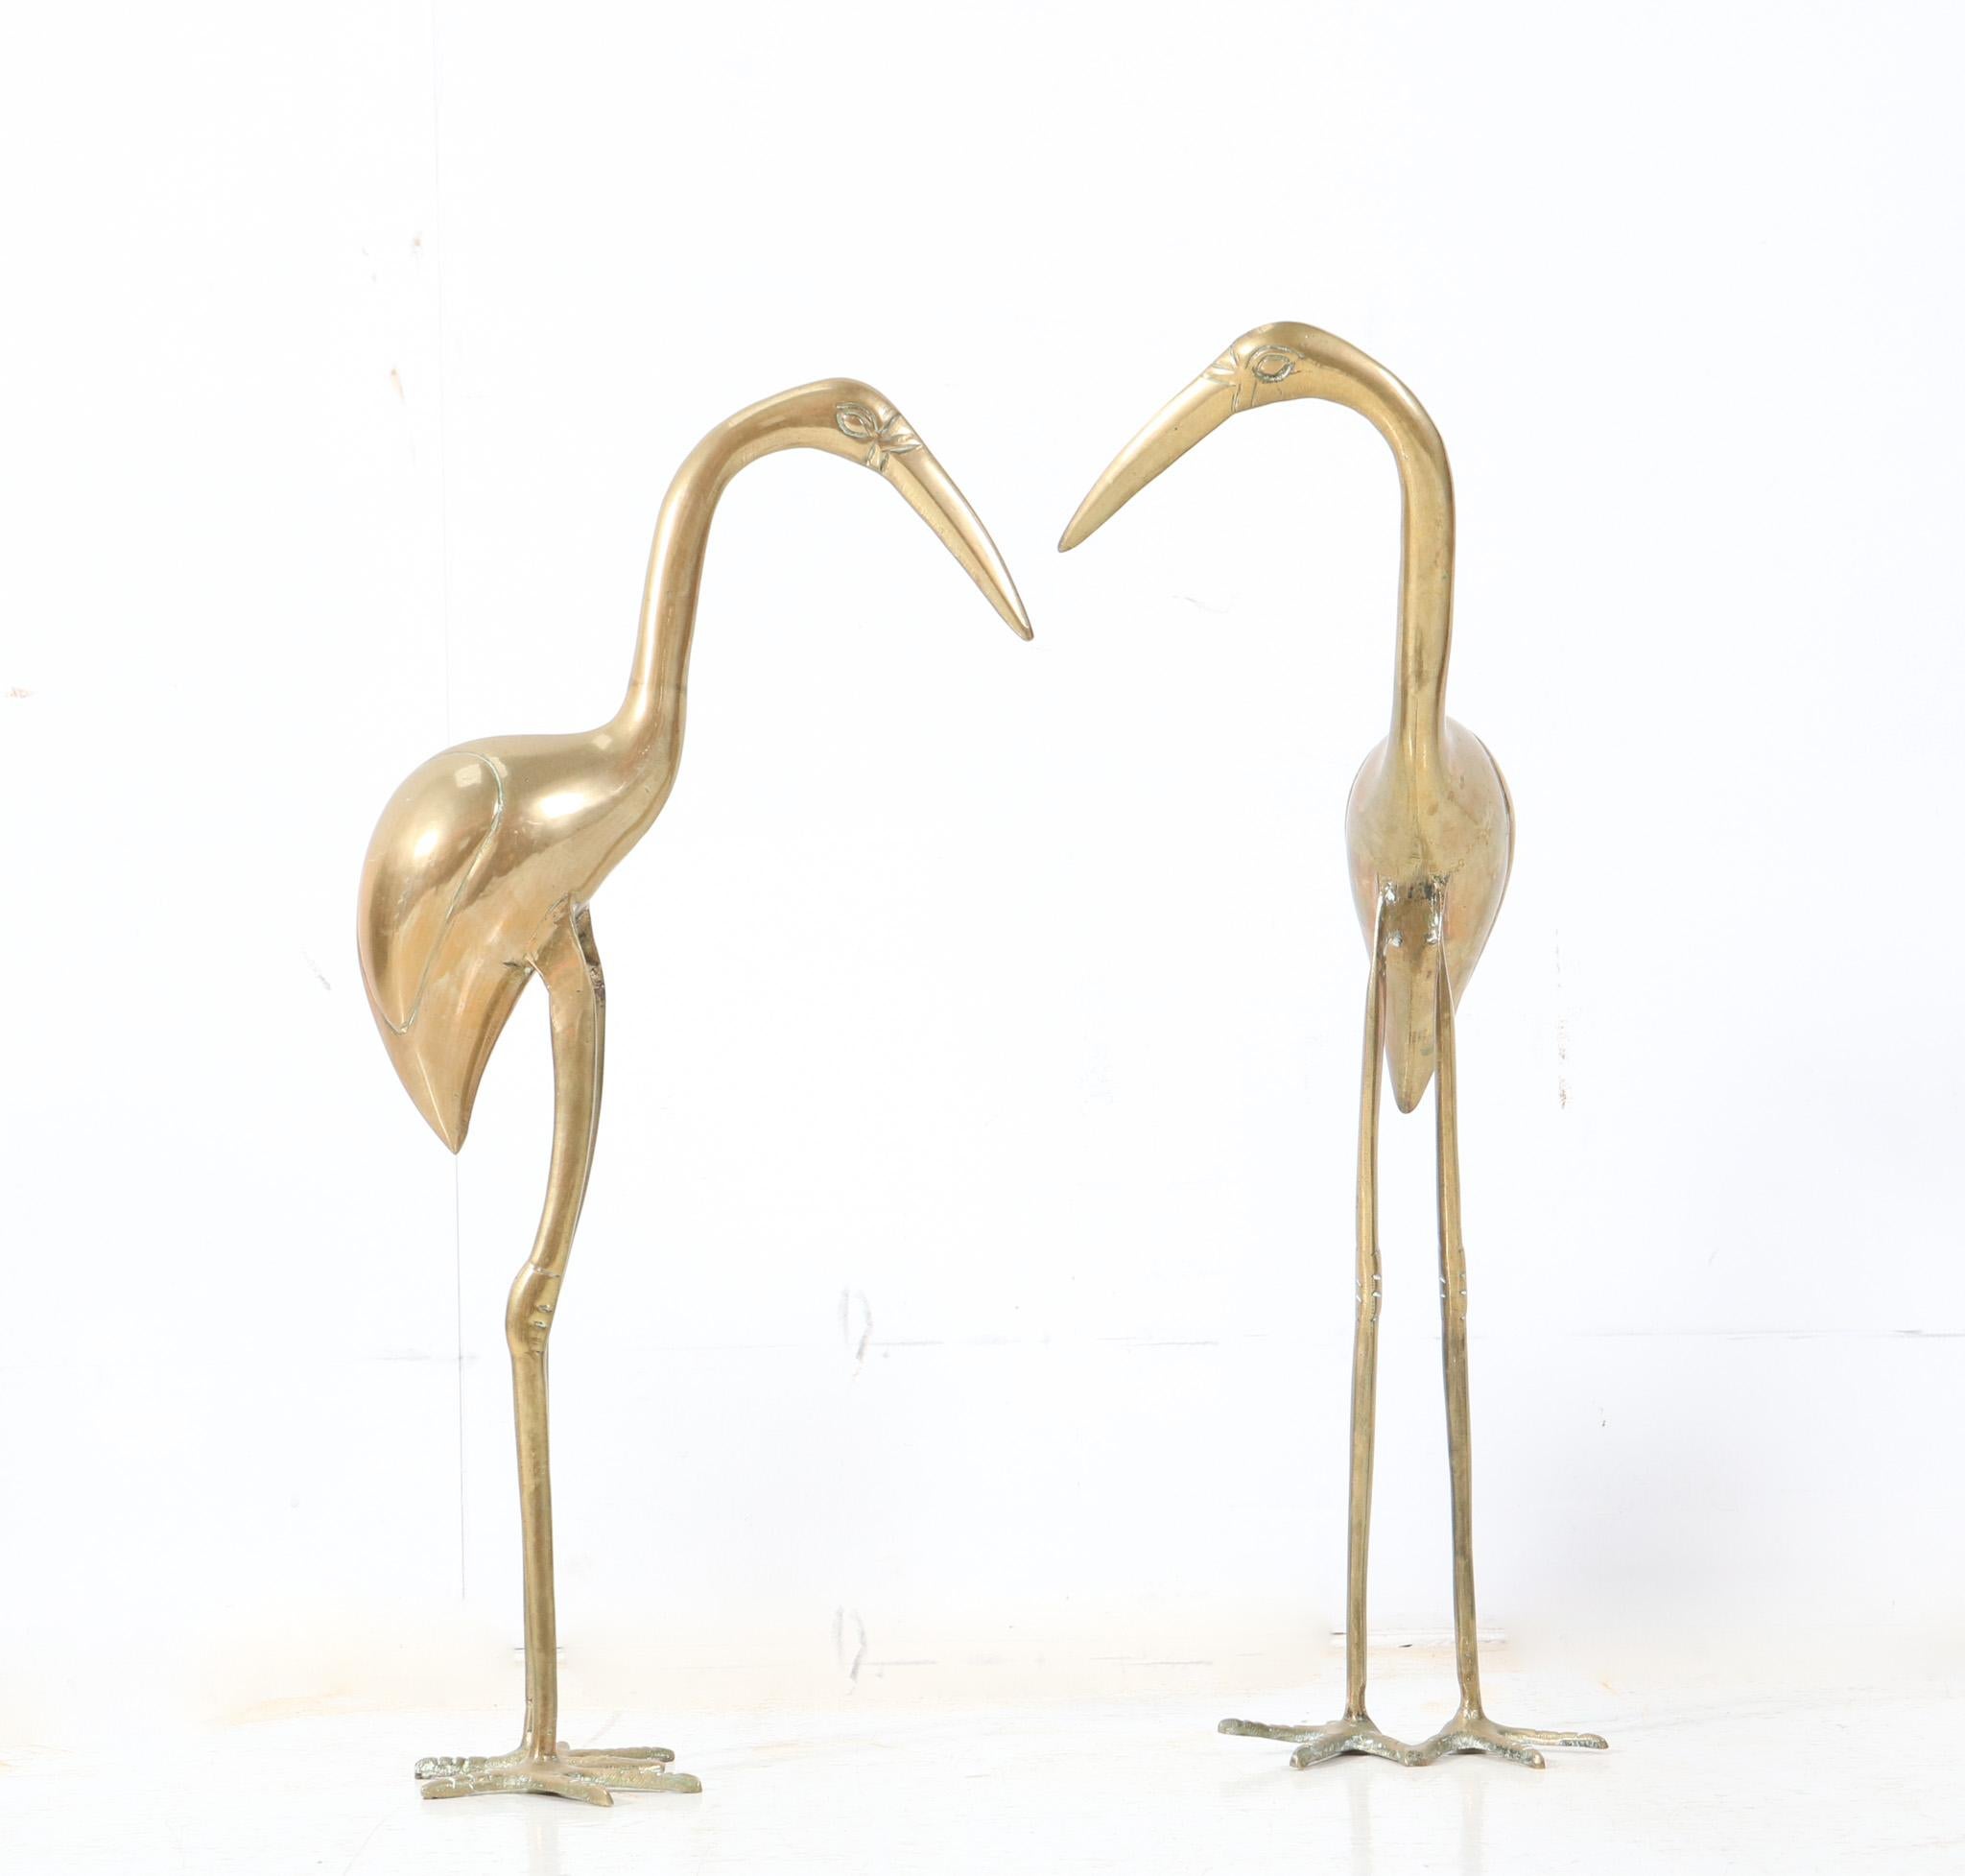 Stunning and elegant pair of Mid-Century Modern Flamingo sculptures.
Striking Italian design from the 1970s.
Executed in brass and monumental in size and drama.
This wonderful pair of Mid-Century Modern Flamingo sculptures is in very good original